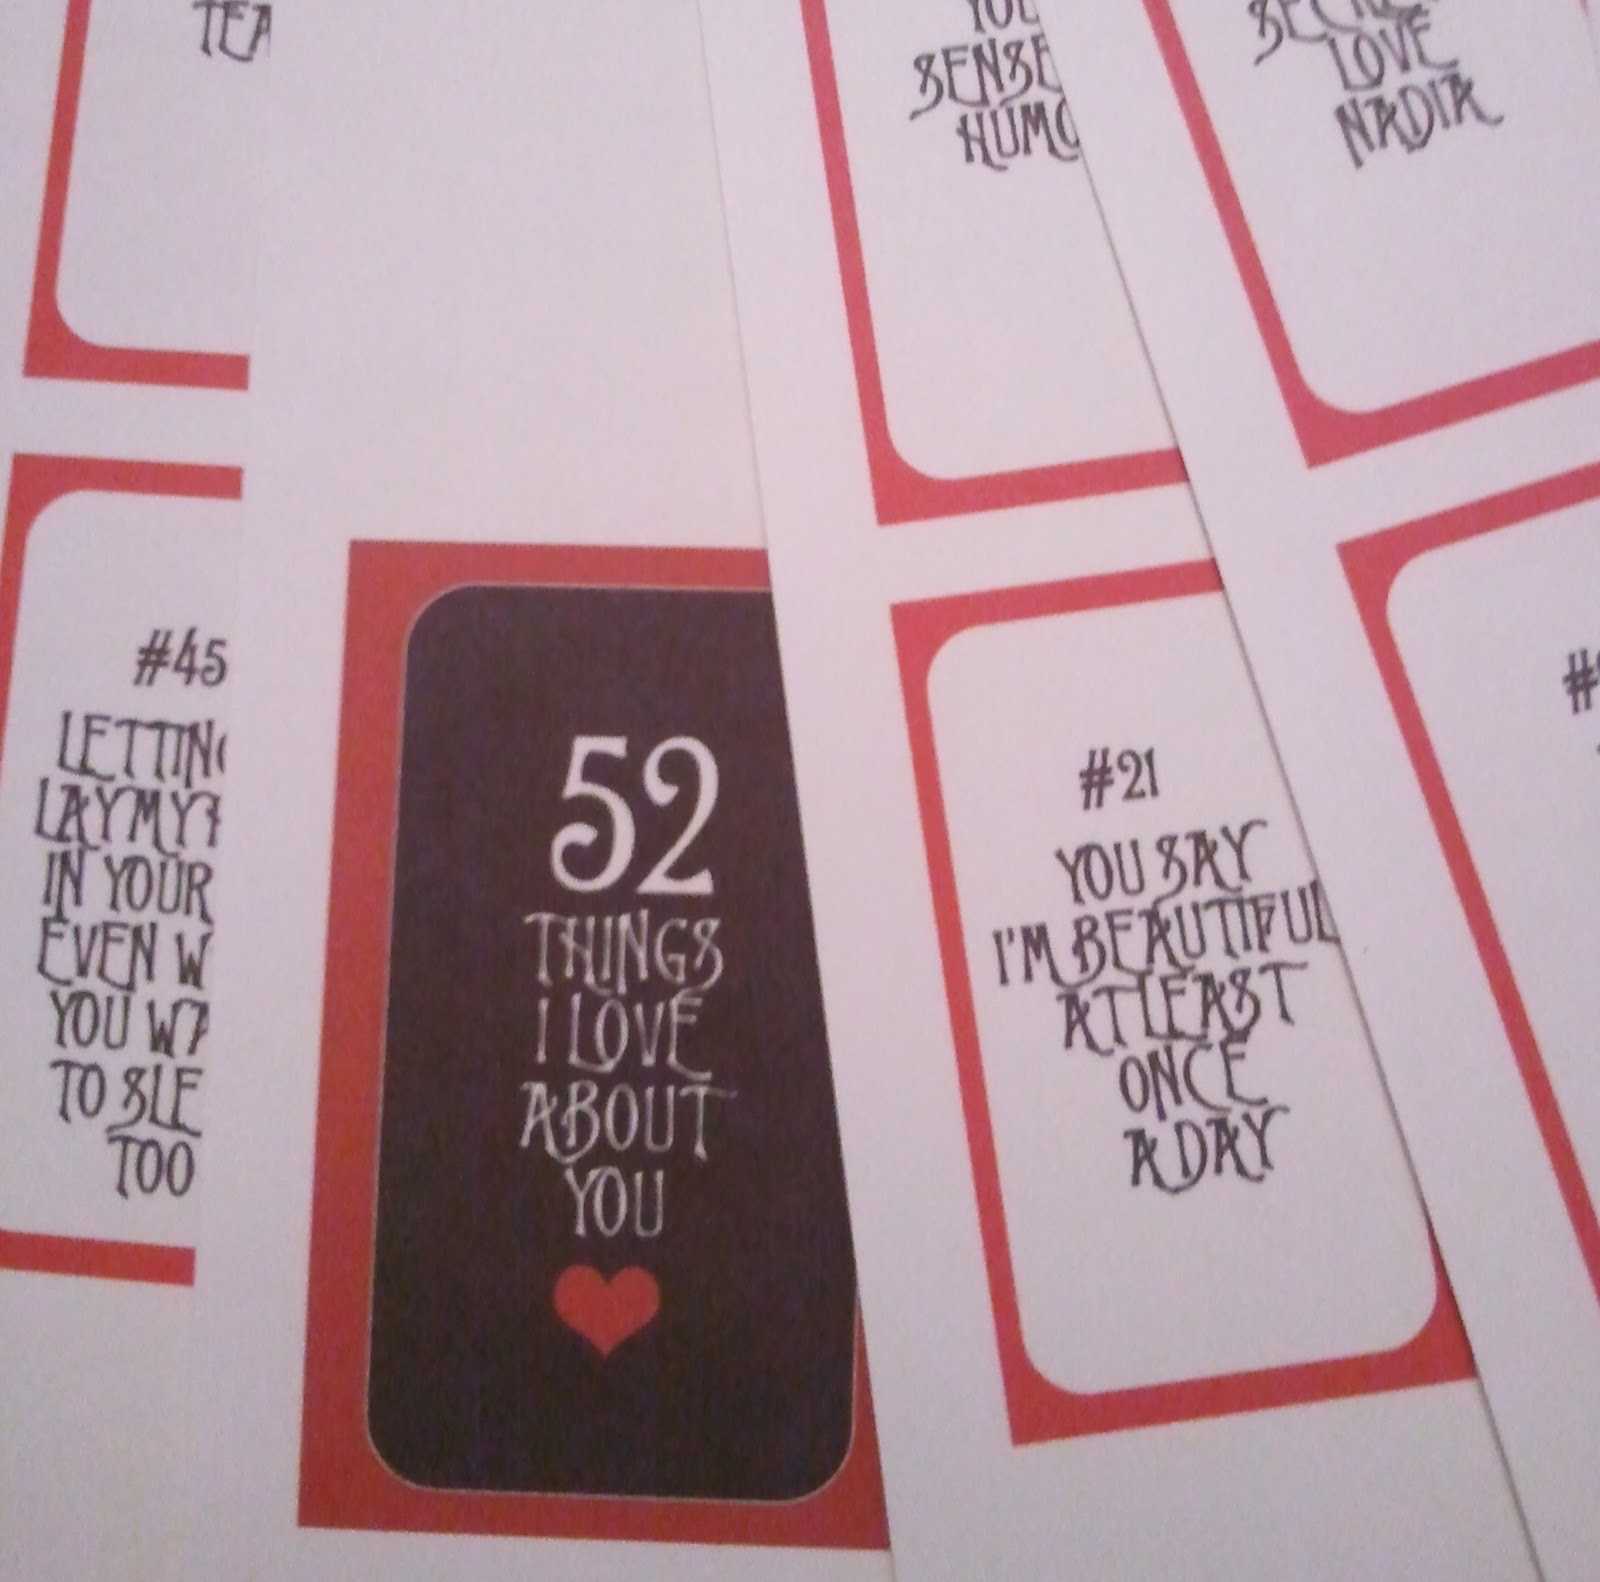 28 Images Of 52 Things Template | Vanscapital Inside 52 Things I Love About You Deck Of Cards Template